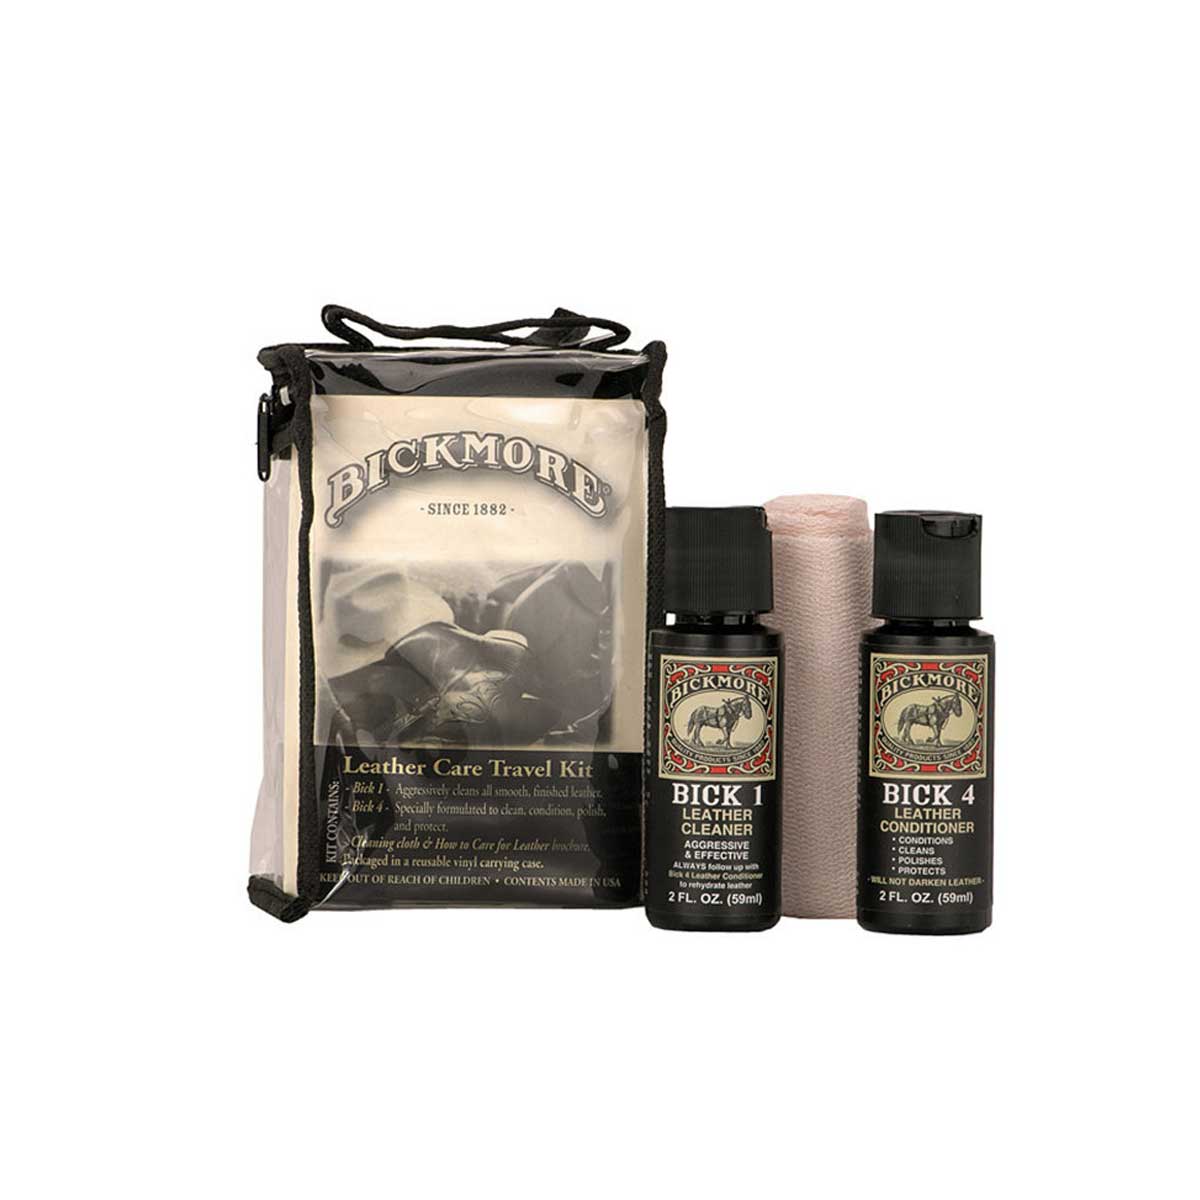 M & F Western Bickmore Leather Care Travel Kit – Lazy J Ranch Wear Stores